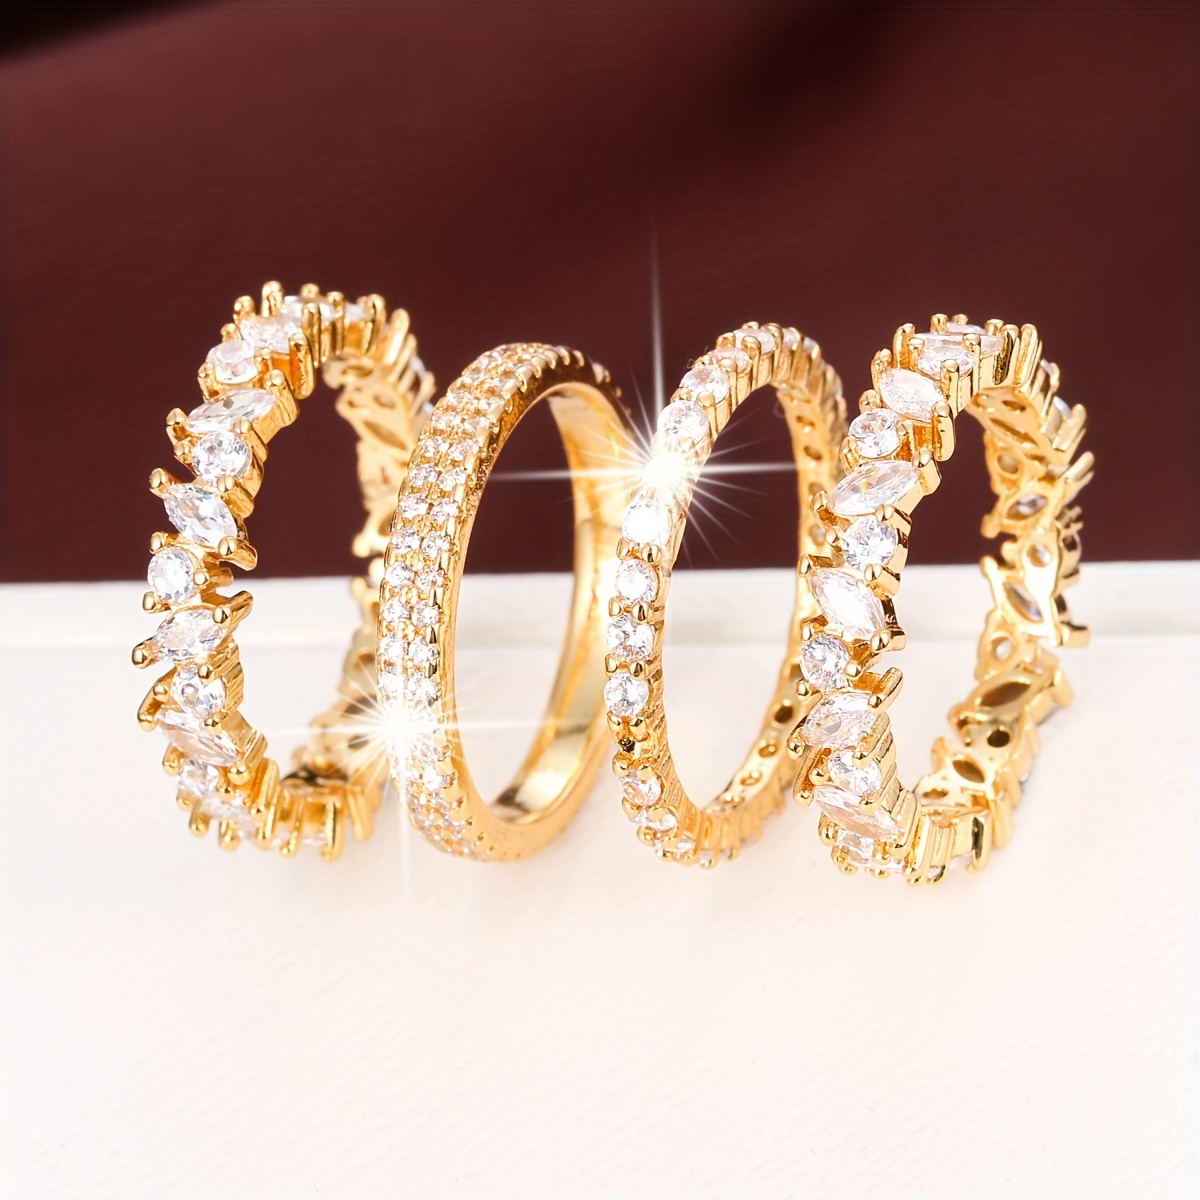 

Chic Stacking Rings Sparkling Band Paved Shining Zirconia Golden Or Silvery Make Your Call Match Daily Outfits Party Accessories